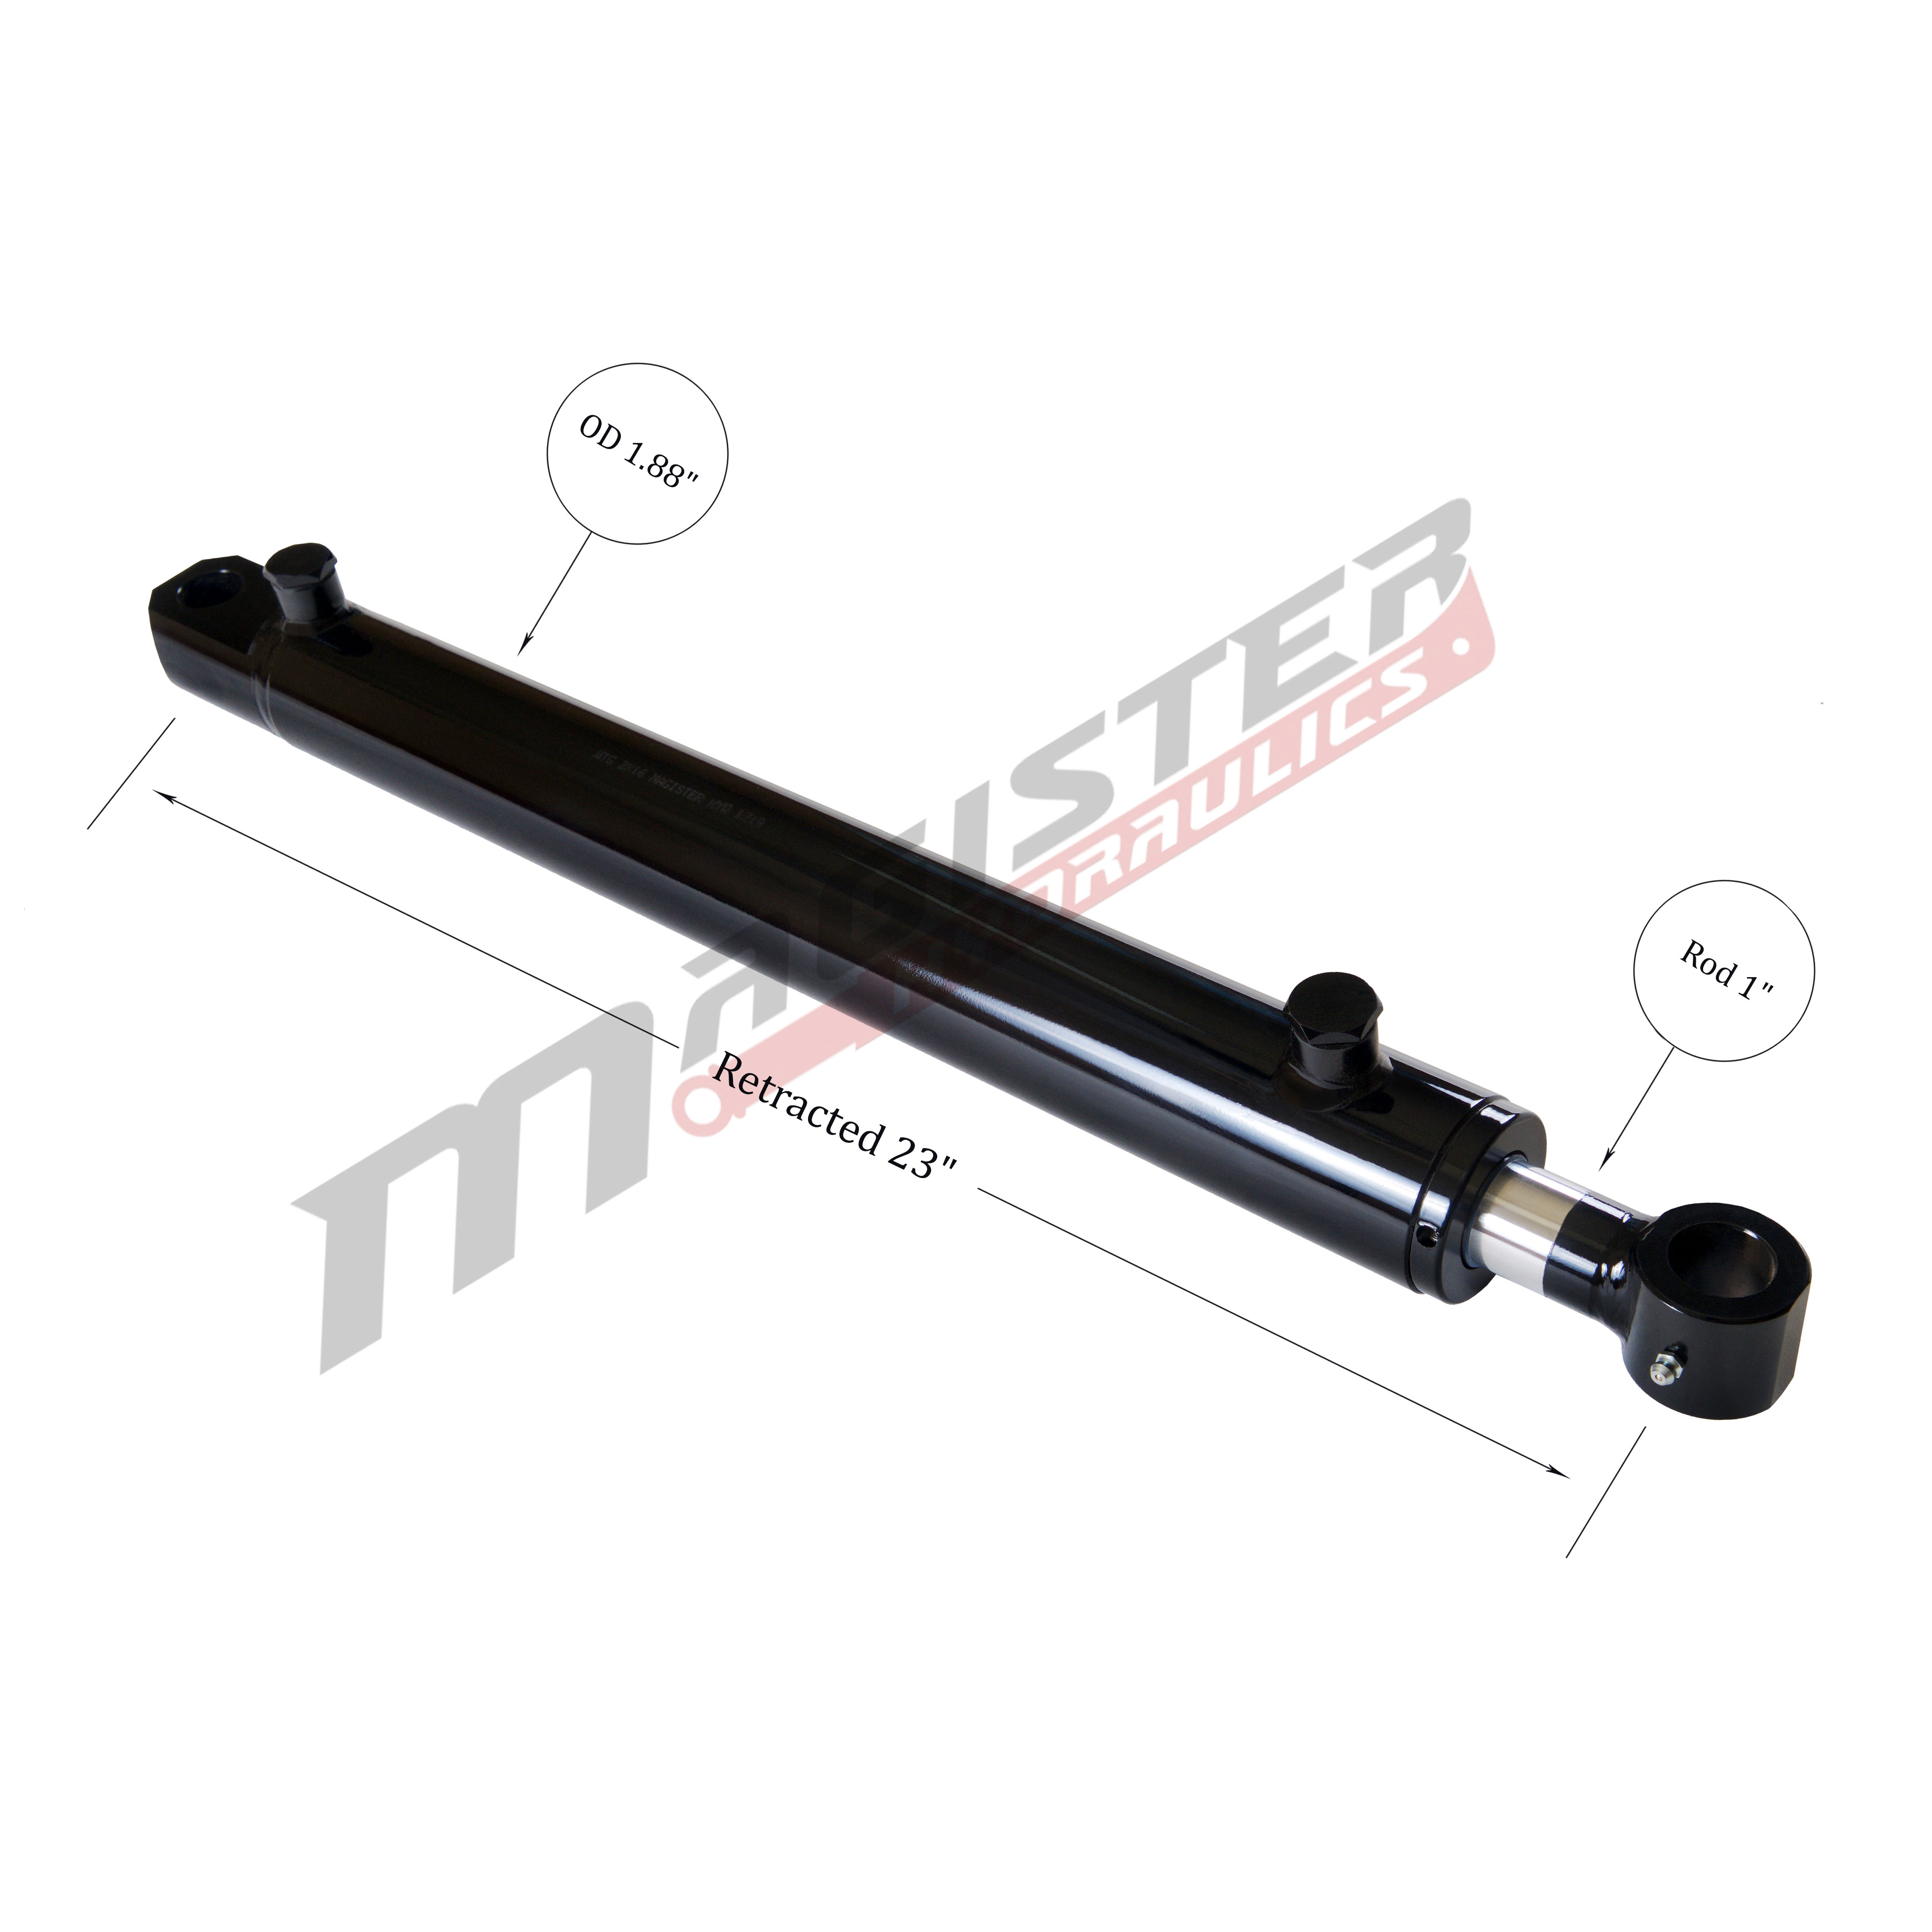 1.5 bore x 14 stroke hydraulic cylinder, welded tang double acting cylinder | Magister Hydraulics